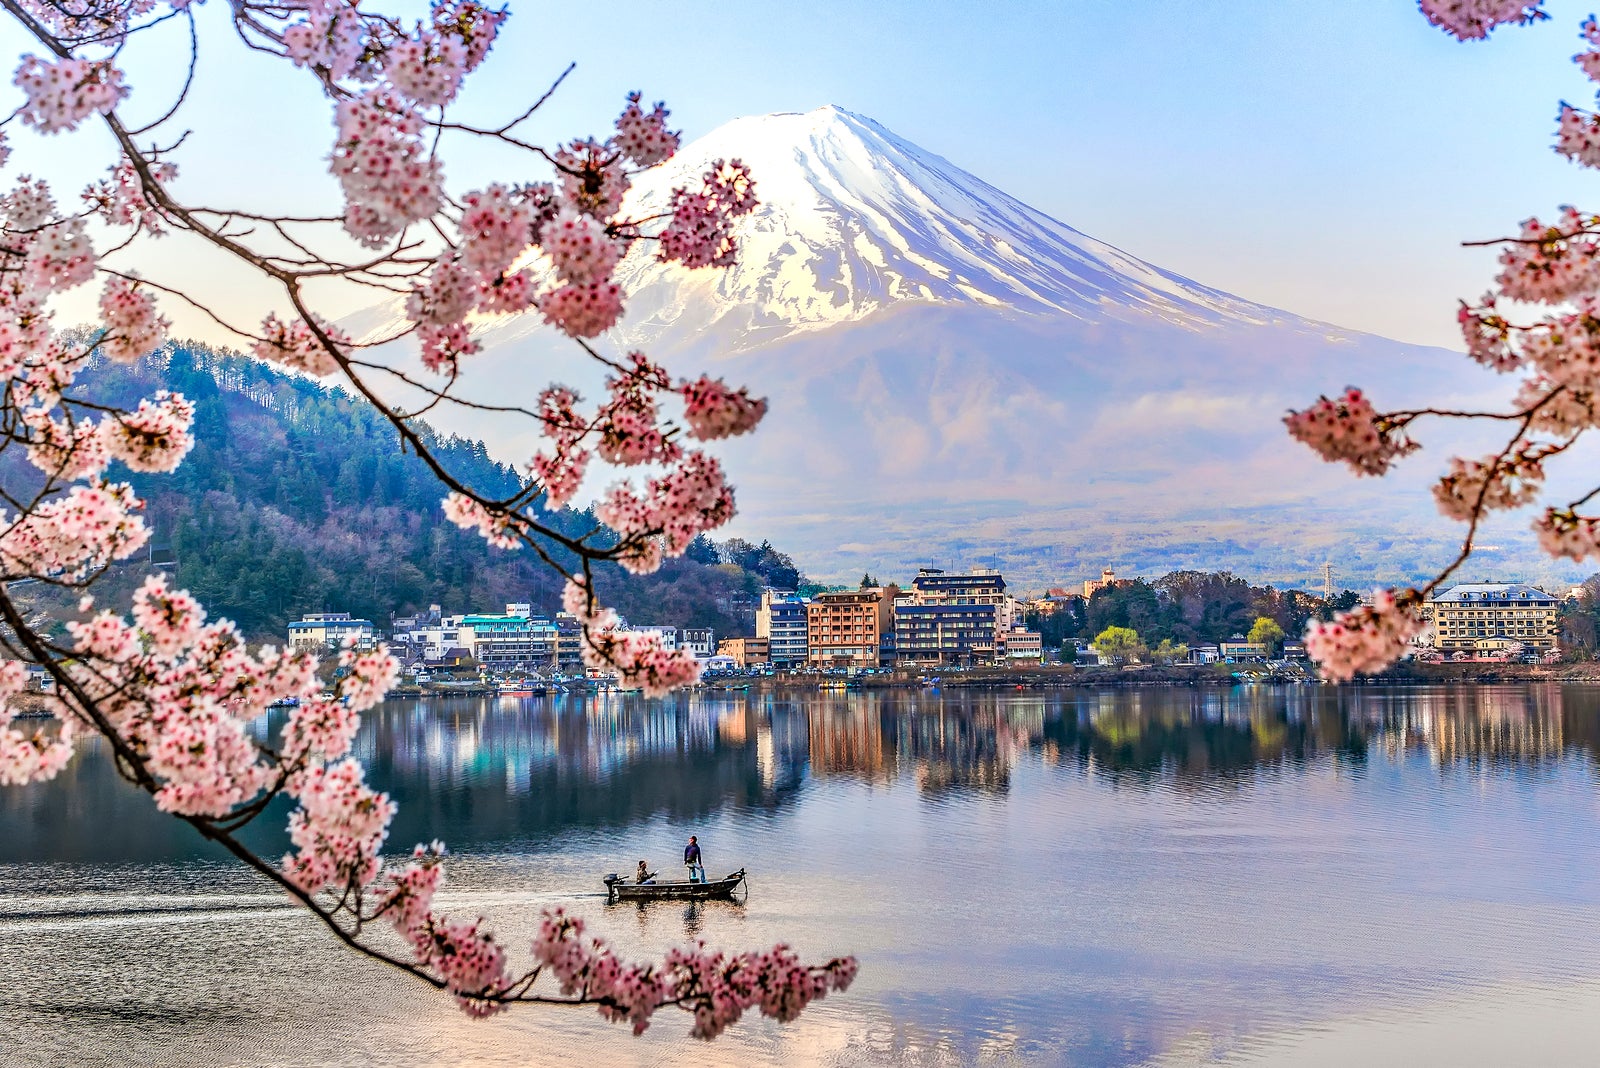 Digital nomad visa purposes to launch in Japan in March